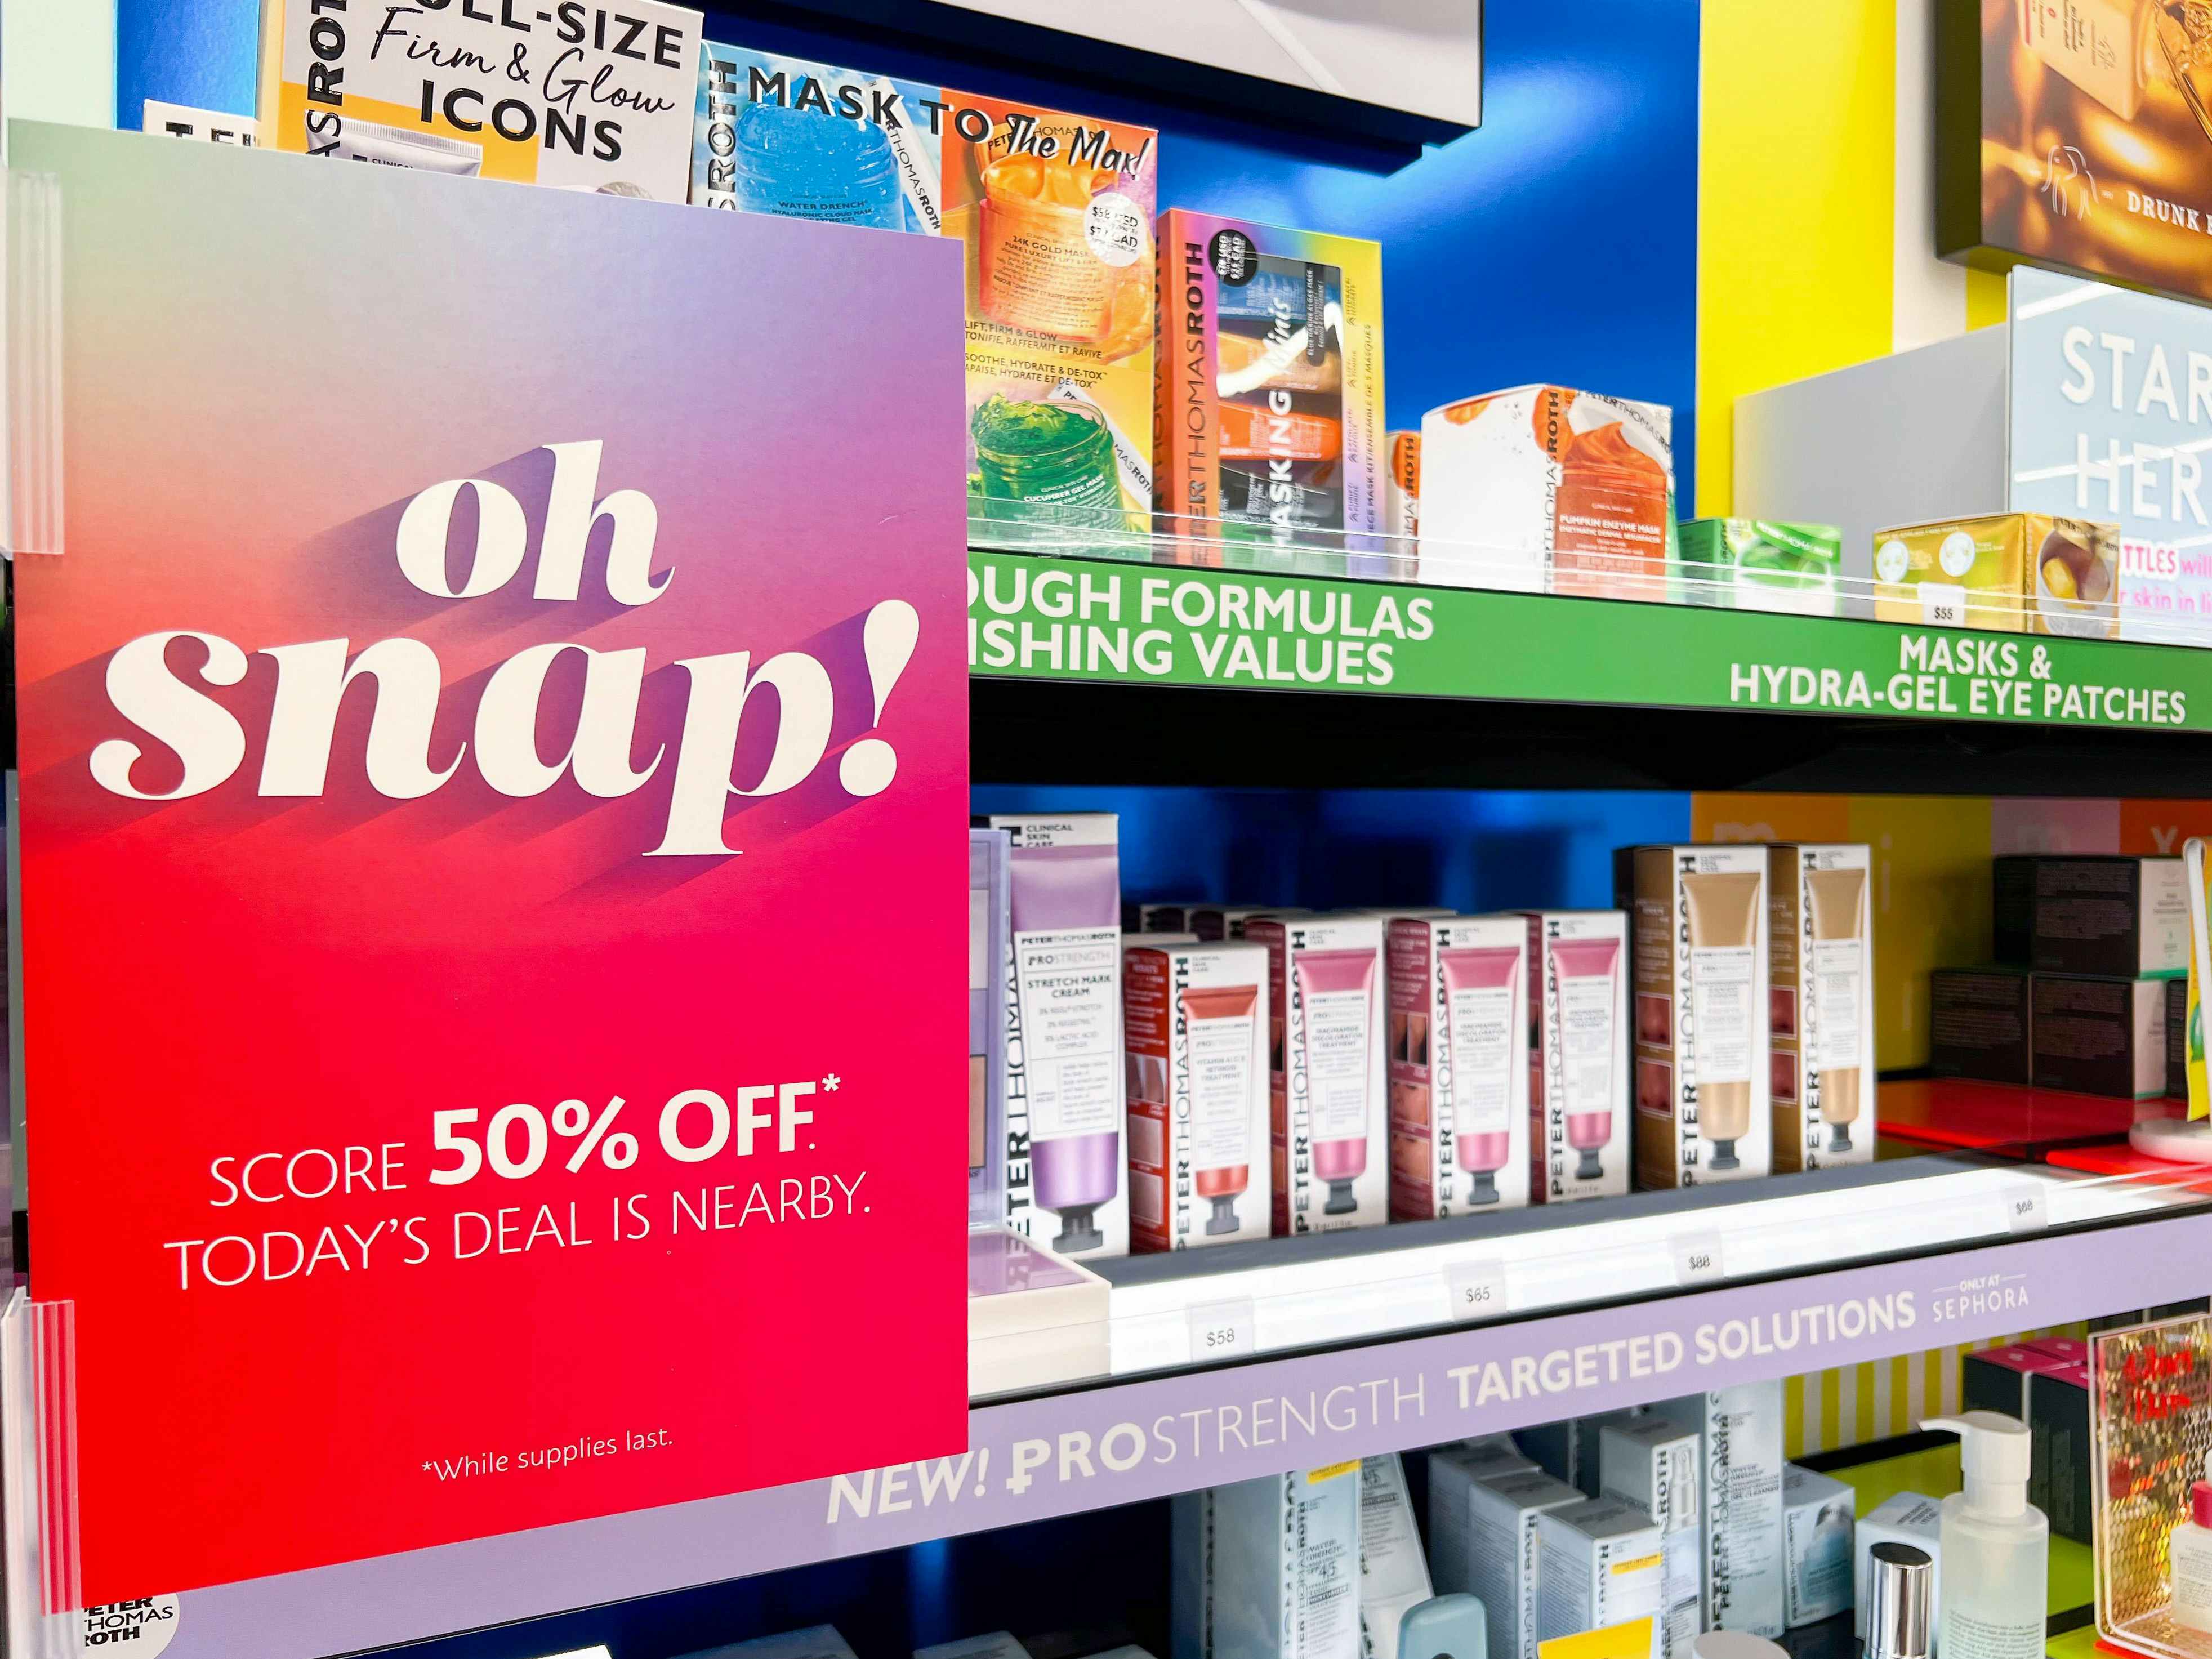 A sign for Sephora's Oh Snap sale attached to a shelf inside Sephora